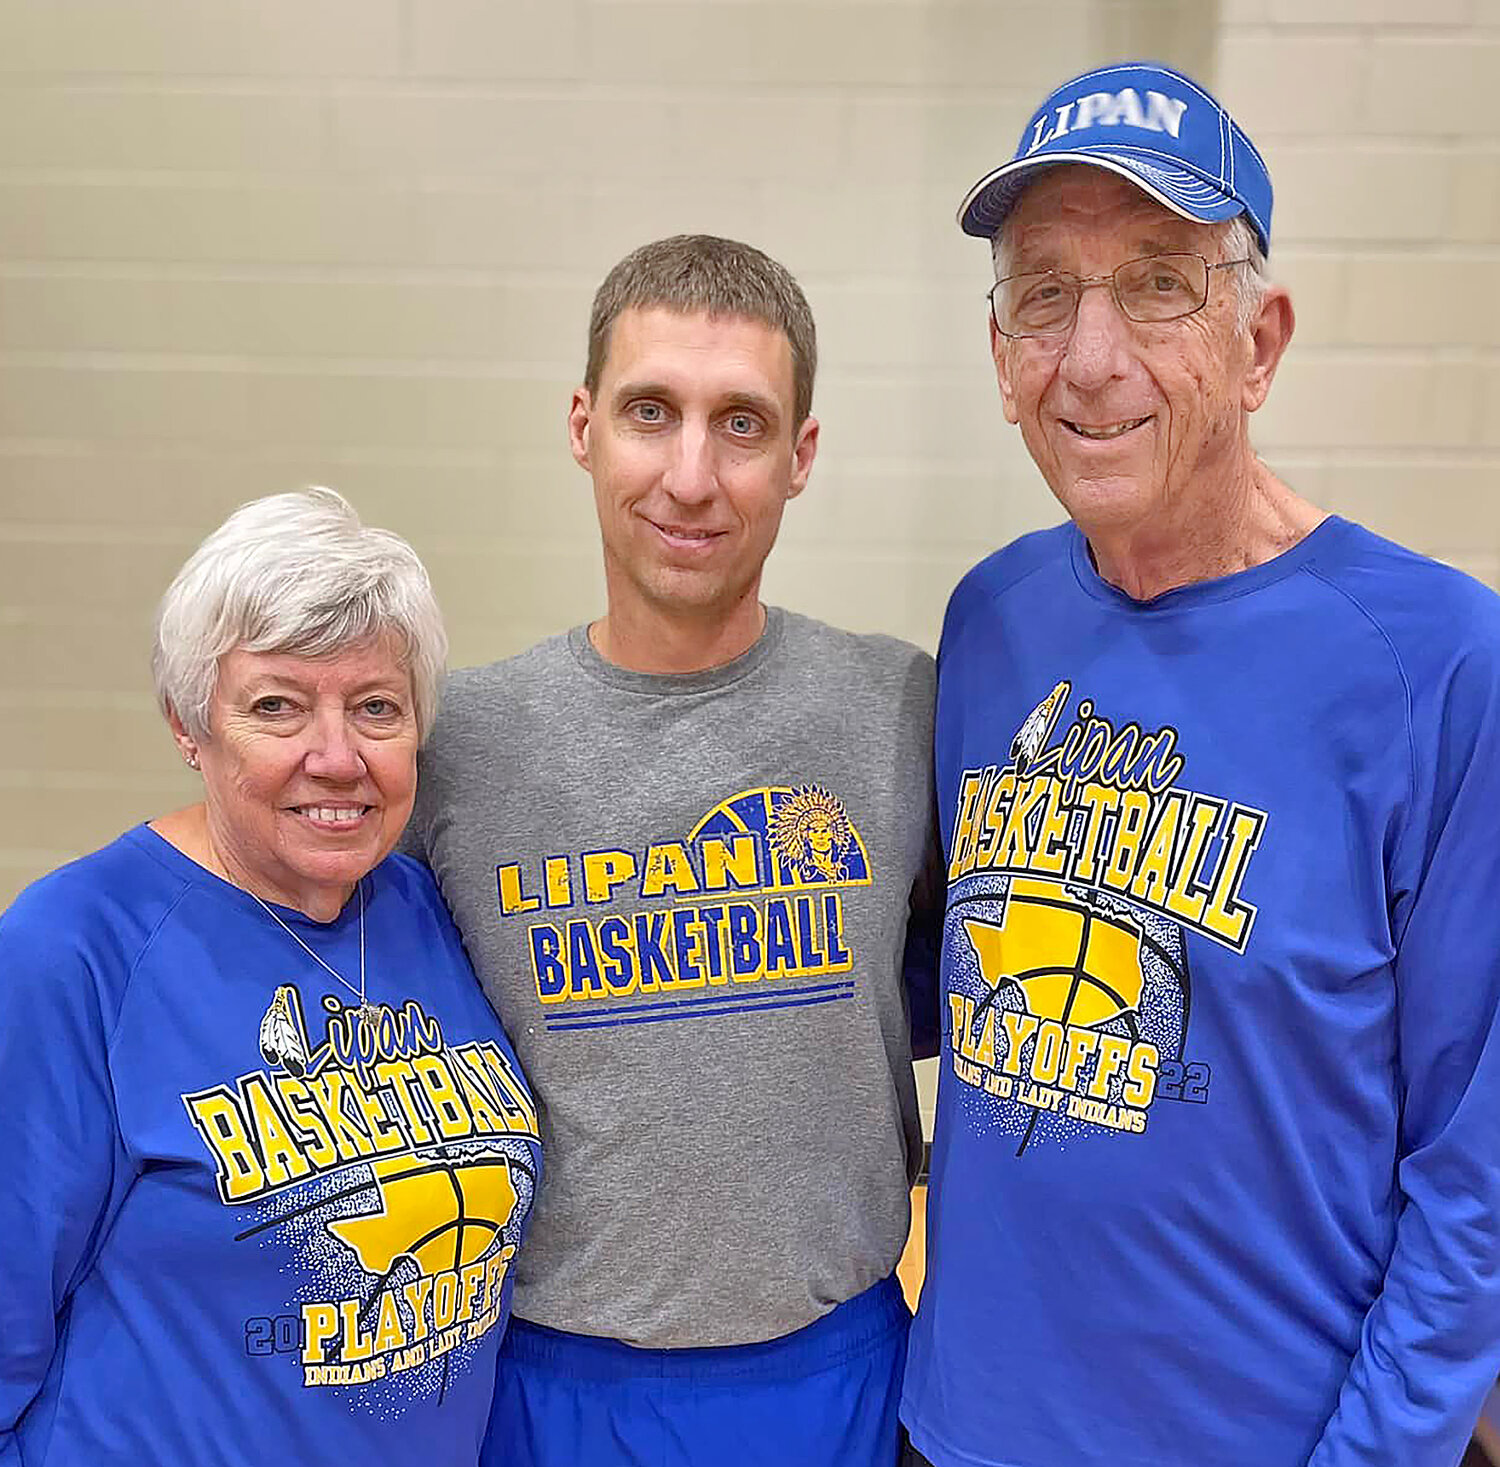 Brent Gaylor, center, has credited his father, Lonnie Gaylor, right, for the success he has enjoyed as a coach. Brent's mom, Myra, is pictured at left. Lonnie Gaylor, whose Graham High School boys team featured Brent as a starting guard and reached the 1996 Class 3A state championship game, was voted into the Texas Association of Basketball Coaches Hall of Fame in 2016.